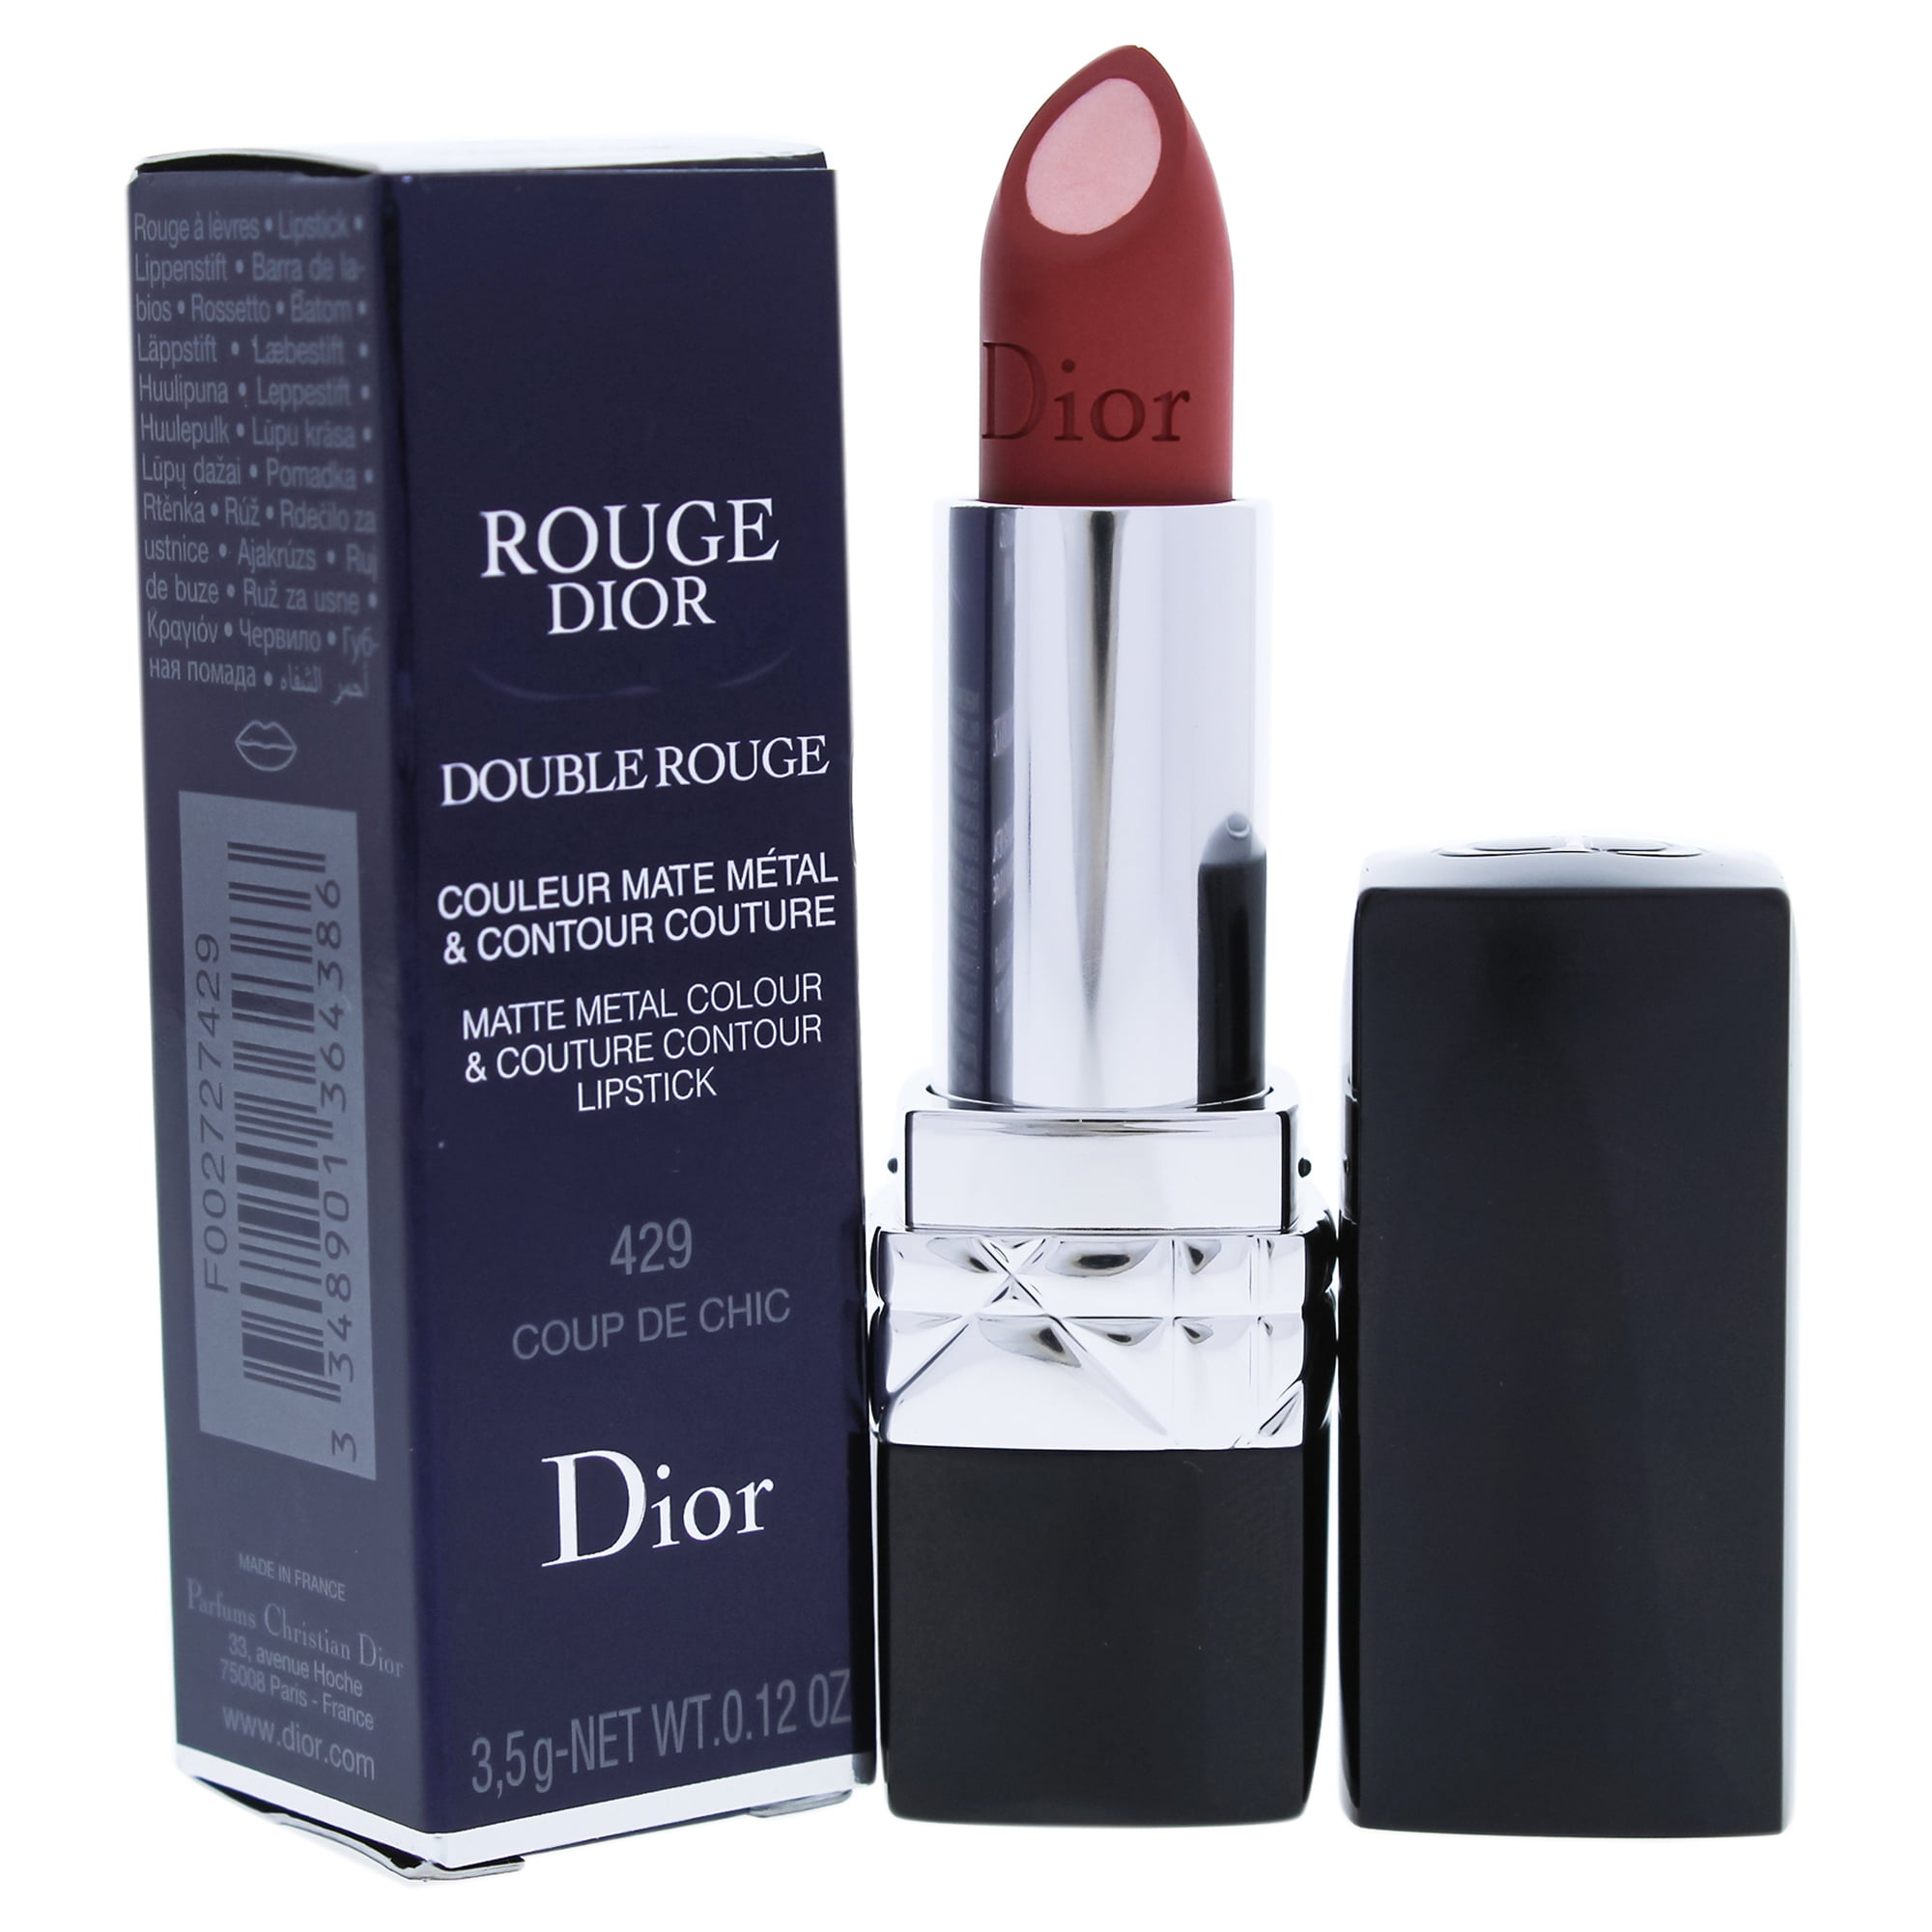 Dior Double Rouge for Fall 2017  Beauty Trends and Latest Makeup  Collections  Chic Profile